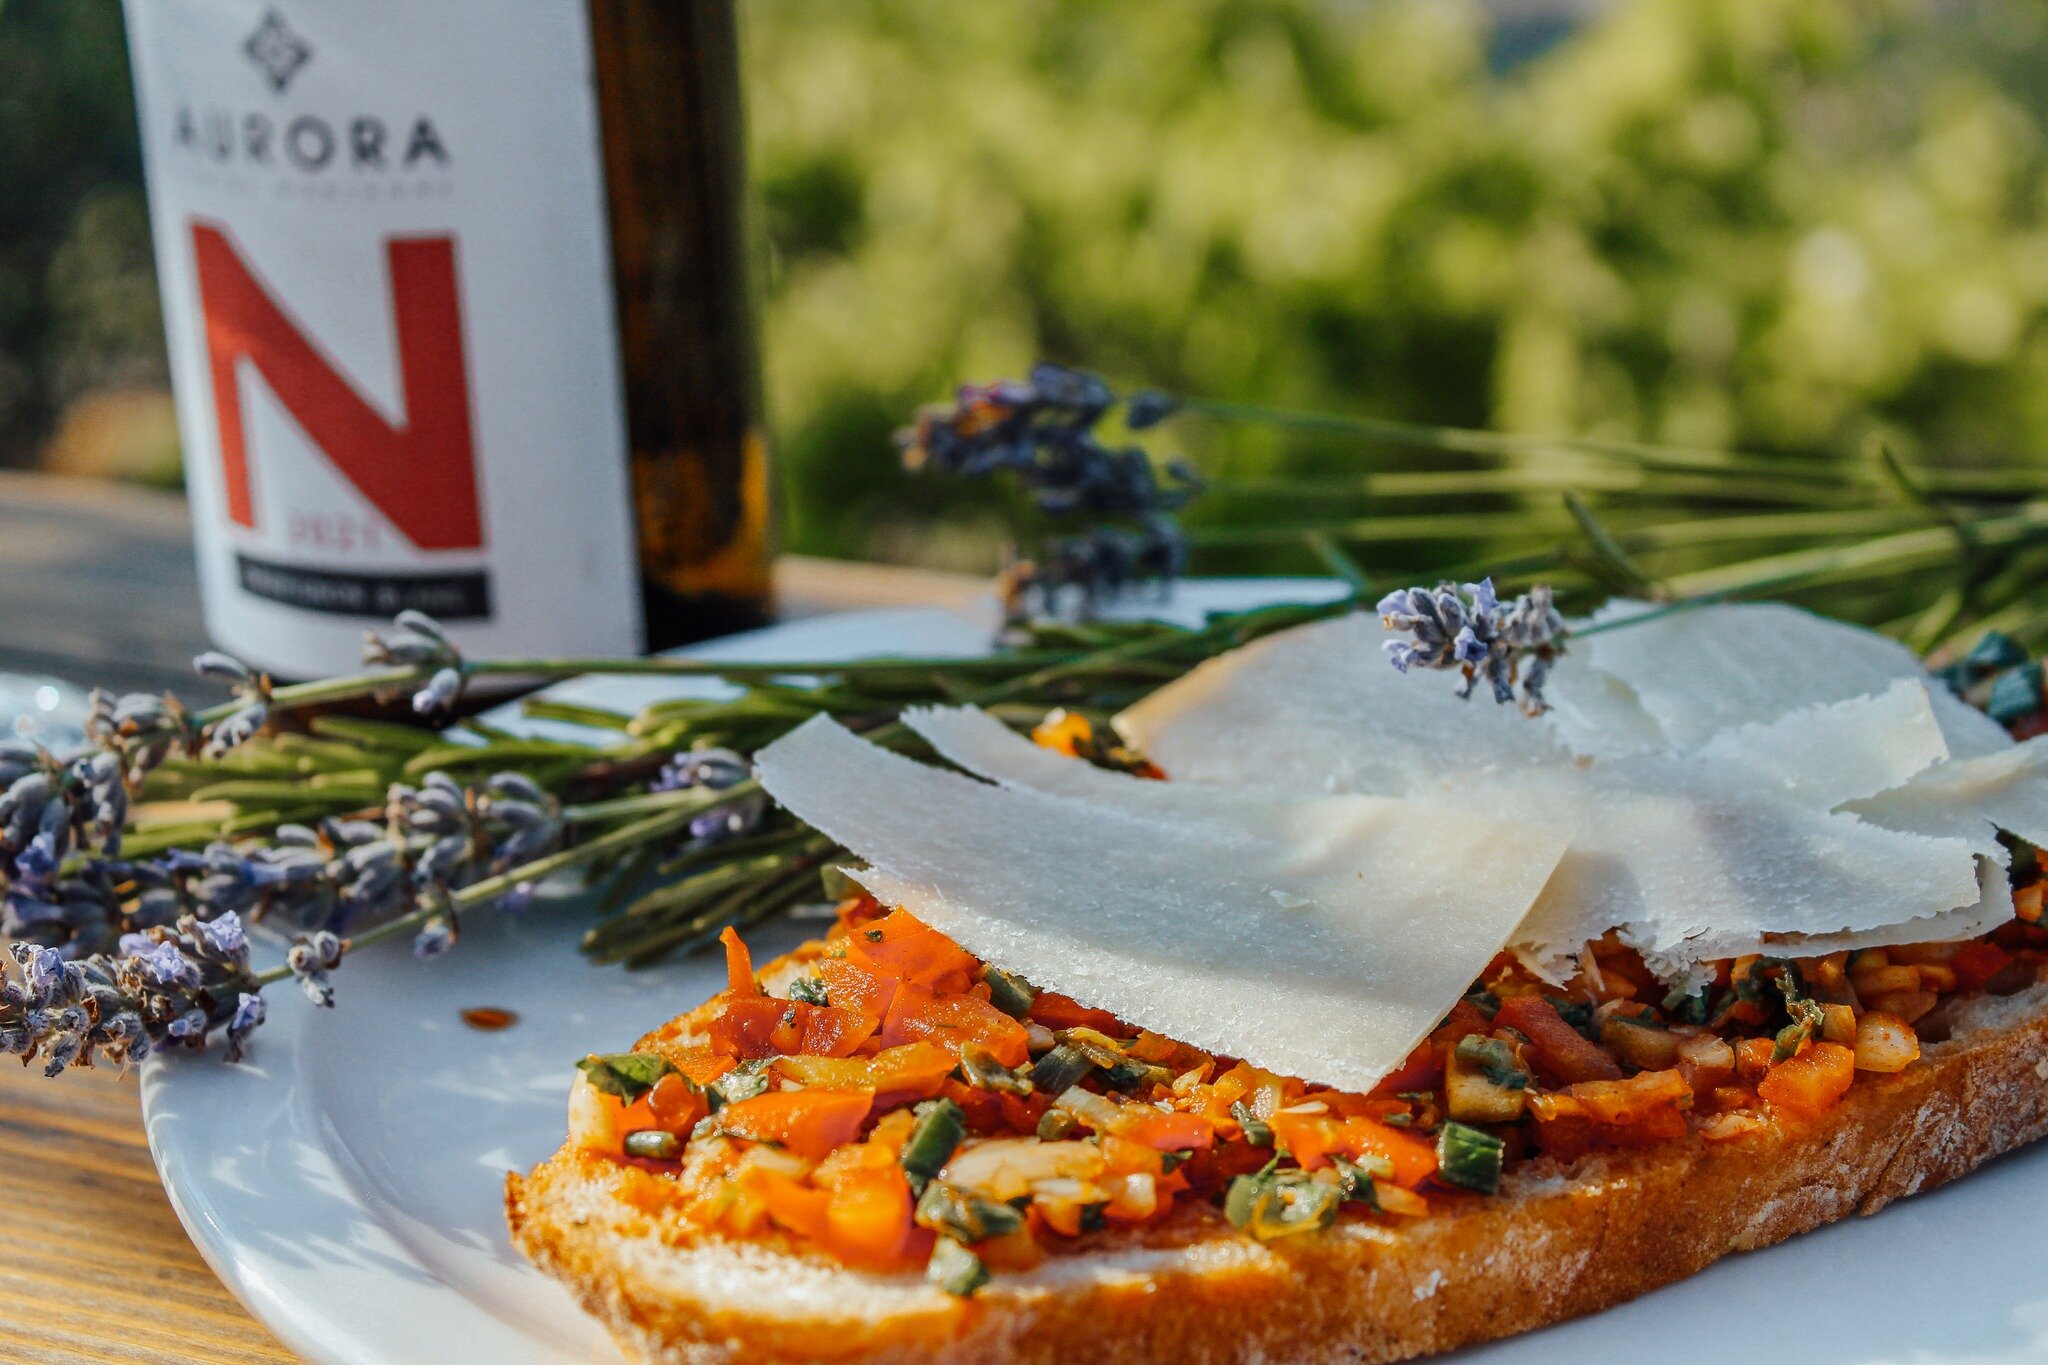 Grilled bruschetta paired with a glass of sauvignon blanc sounds like a match made in heaven! 

 #winerylovers #winerytour #barbecue #barbecuetime #wineryrestaurant #barbecueparty